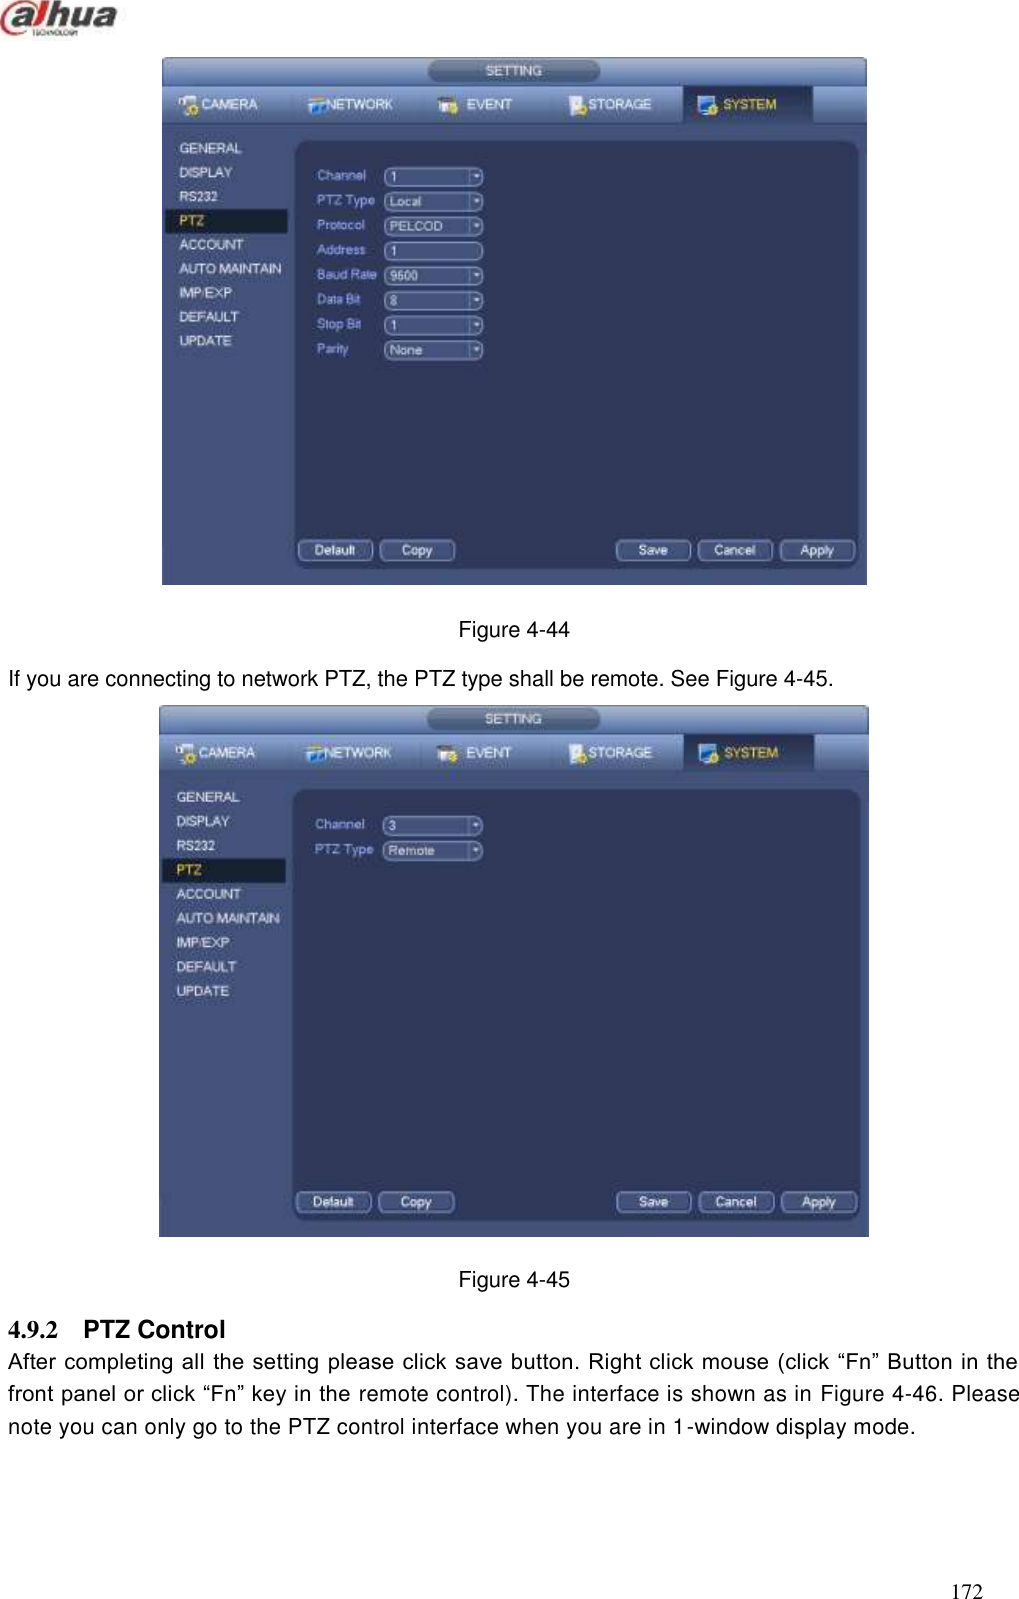  172   Figure 4-44 If you are connecting to network PTZ, the PTZ type shall be remote. See Figure 4-45.  Figure 4-45 4.9.2  PTZ Control After completing all the setting please click save button. Right click mouse (click ―Fn‖ Button in the front panel or click ―Fn‖ key in the remote control). The interface is shown as in Figure 4-46. Please note you can only go to the PTZ control interface when you are in 1-window display mode.   